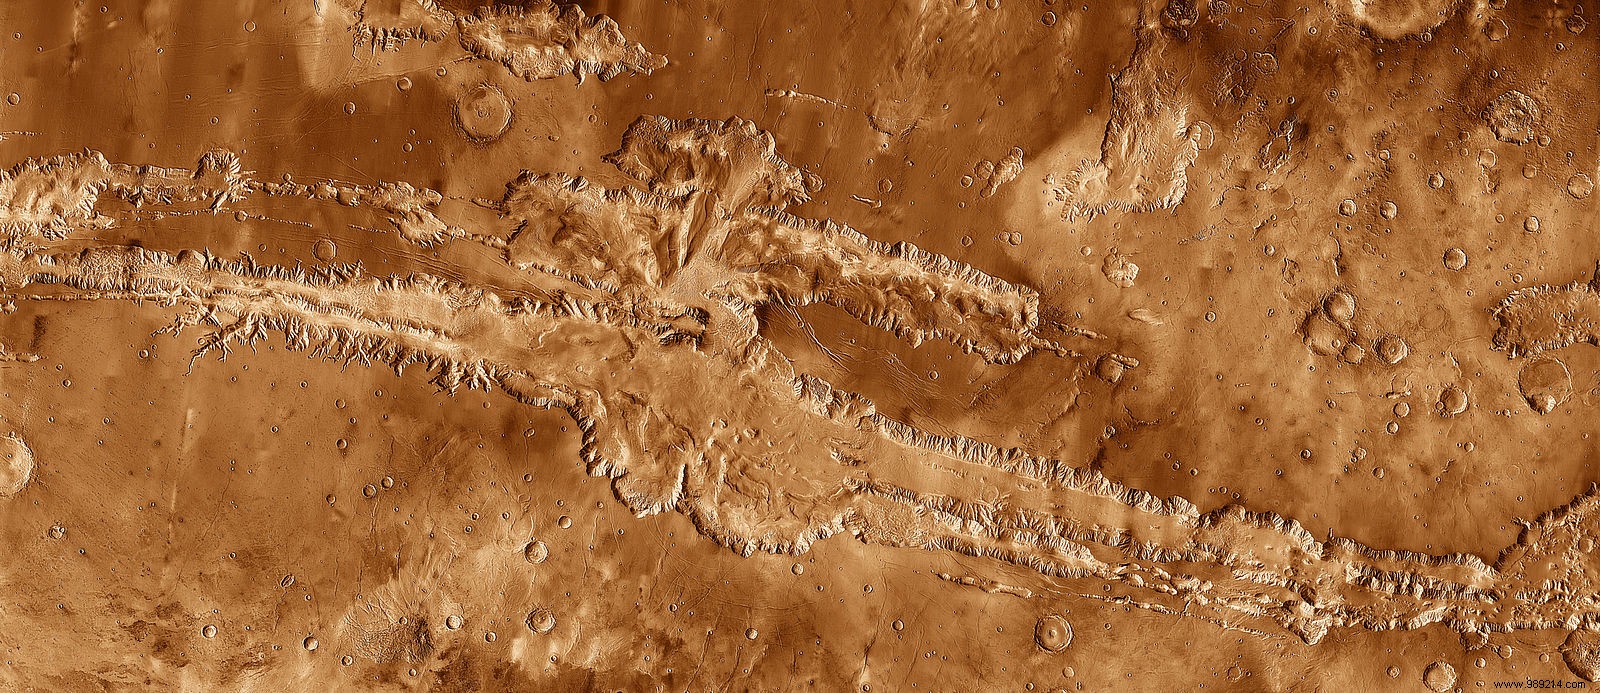 Possible water reserves spotted in the largest canyon in the Solar System 